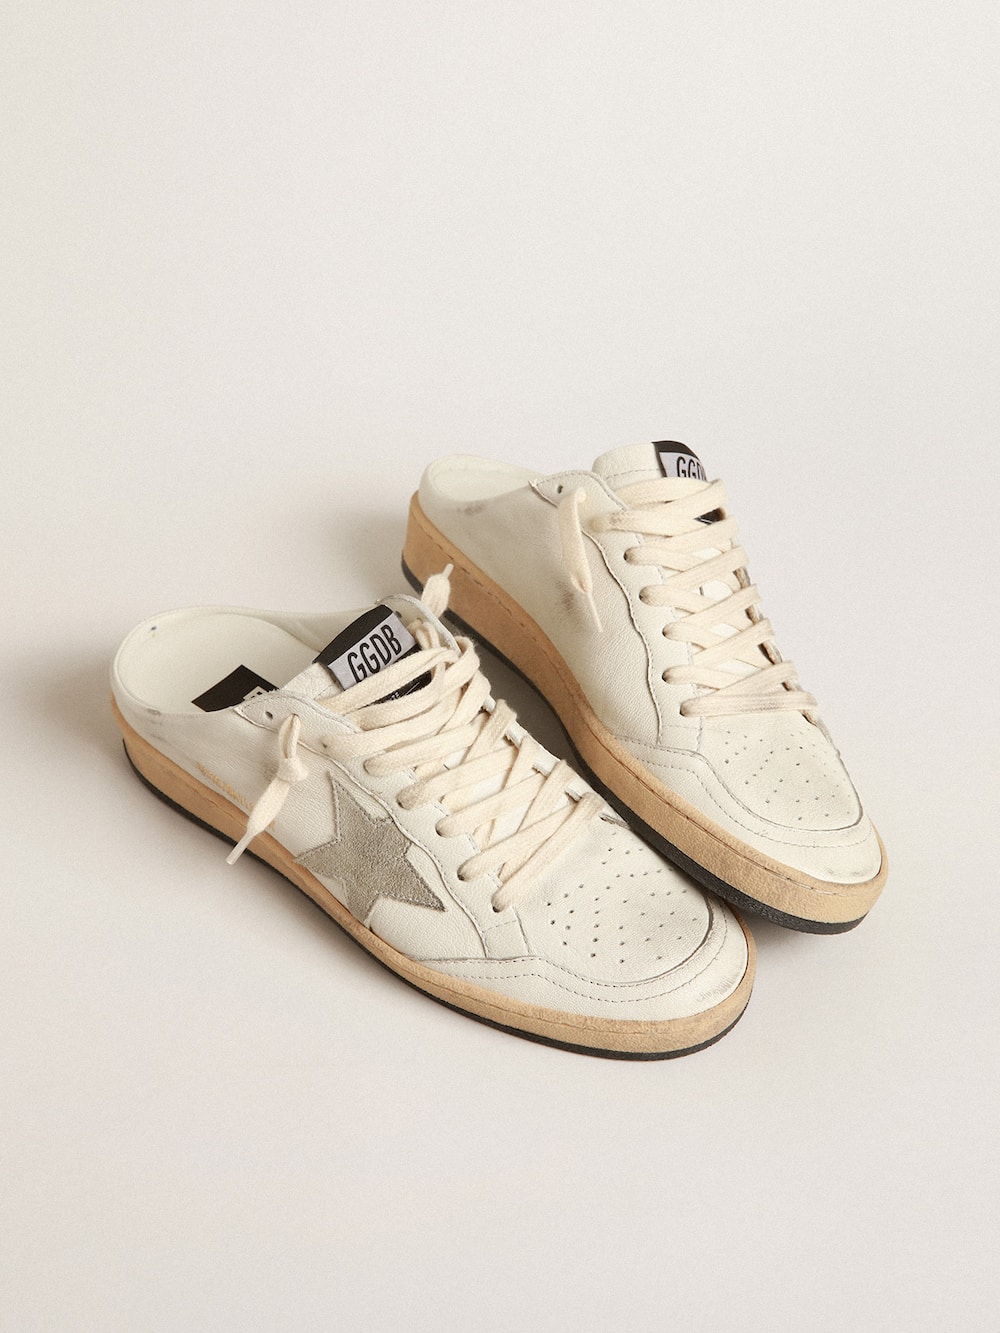 Golden Goose - Ball Star Sabots in nappa leather with ice-gray suede star in 